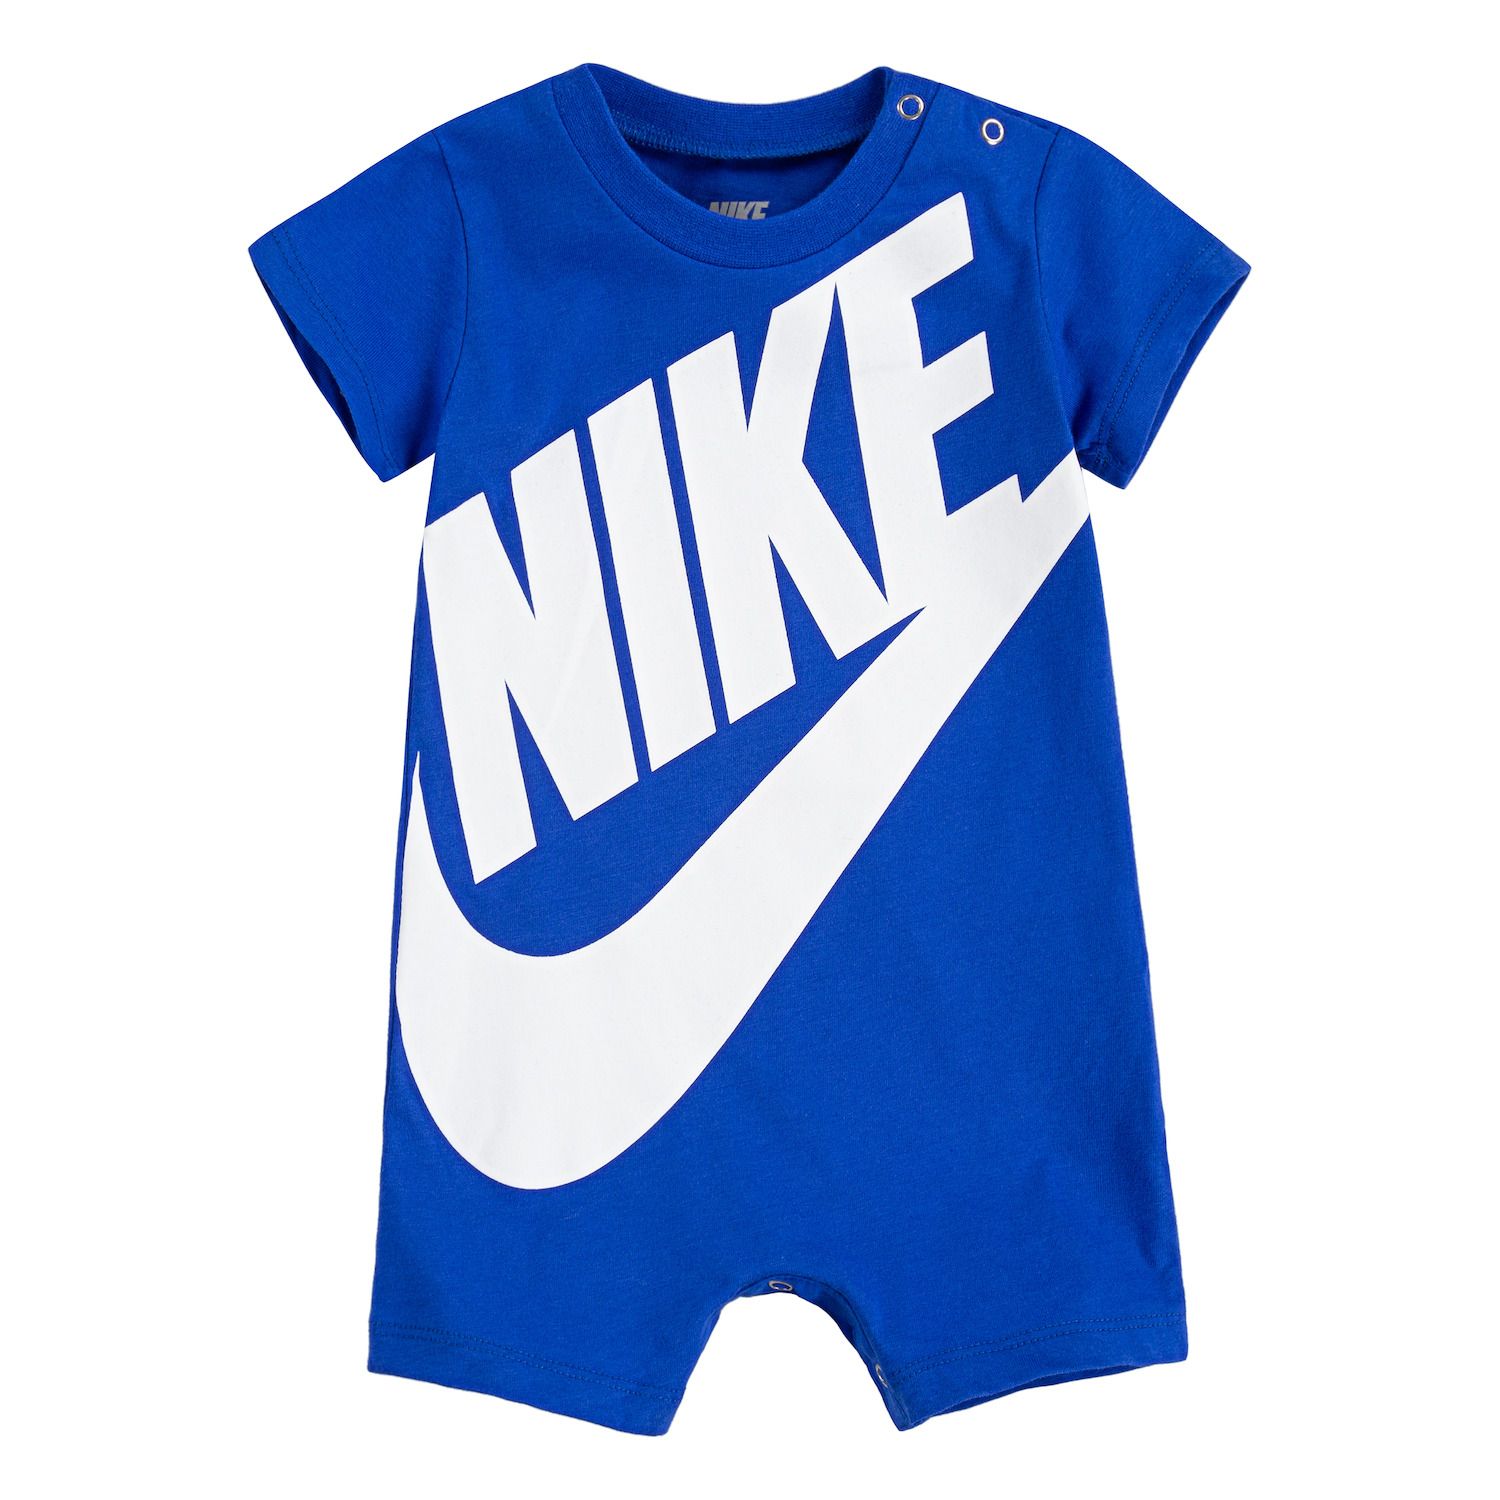 nike outfits baby boy